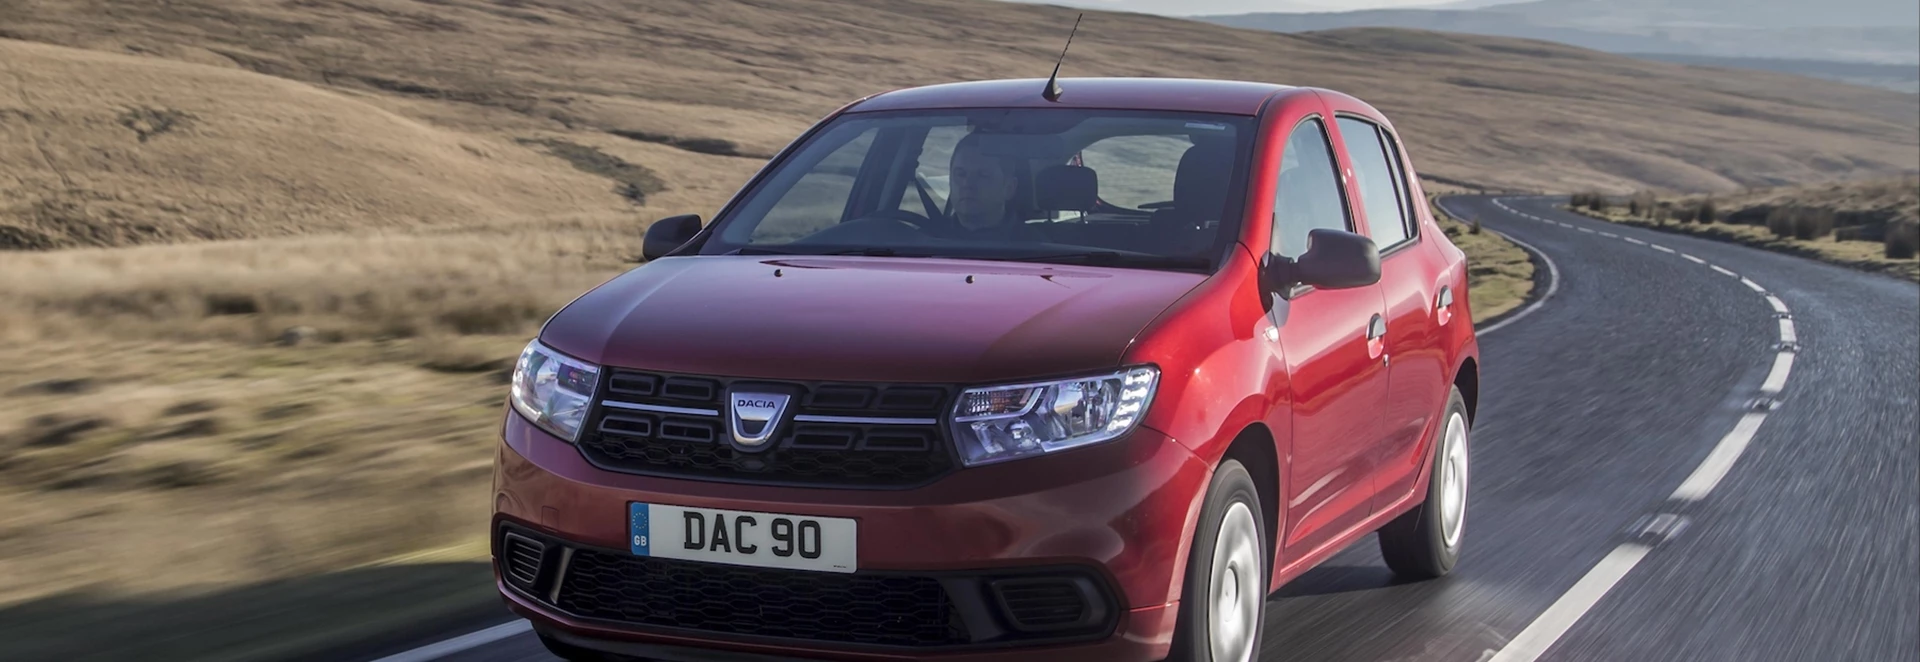 Bargain-busting: These are the 10 cheapest new cars you can buy today 